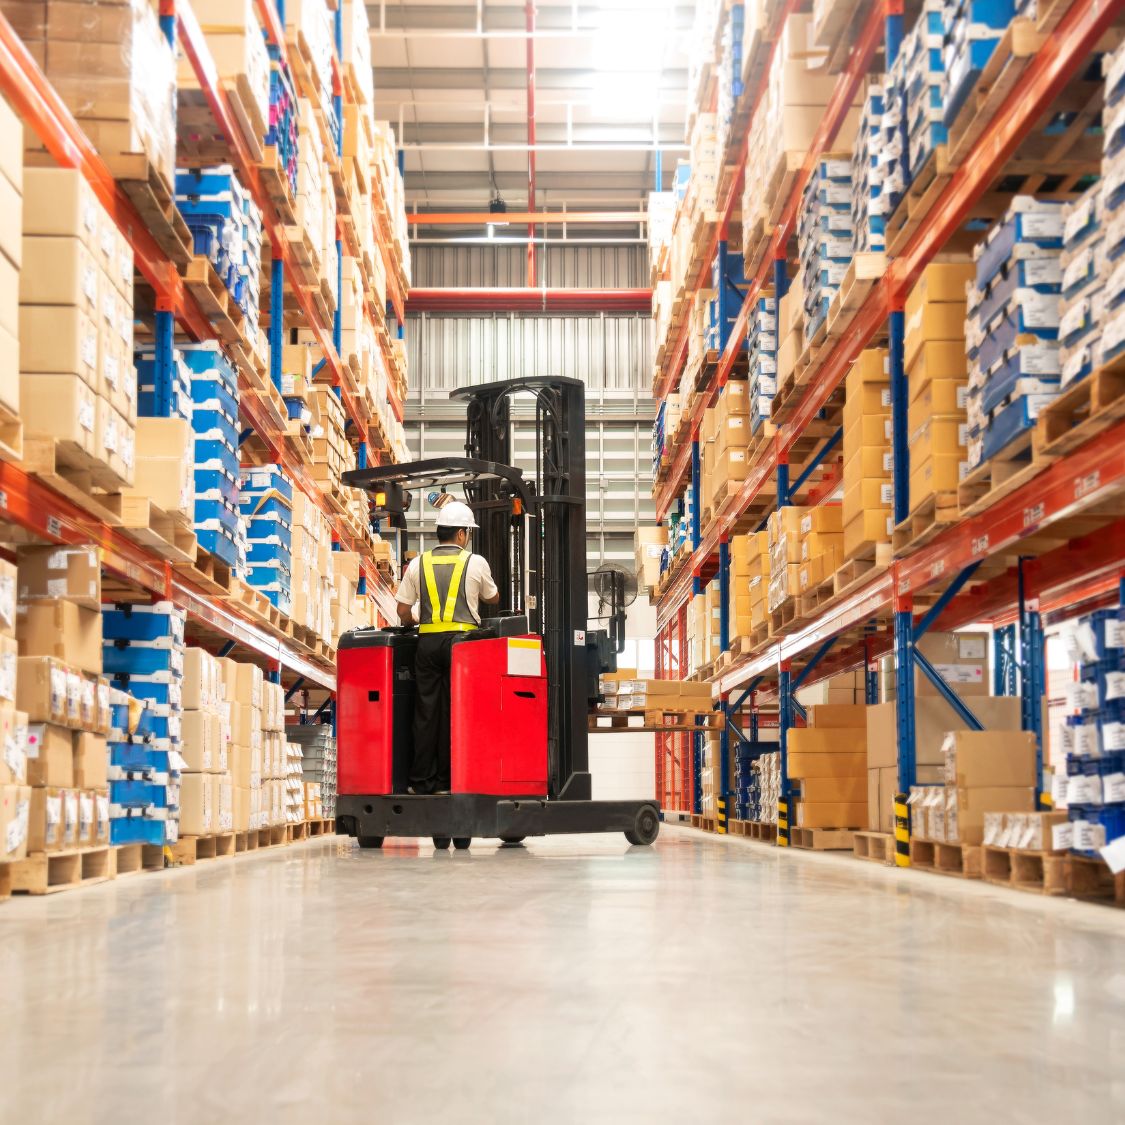 How To Improve Employee Satisfaction in Your Warehouse